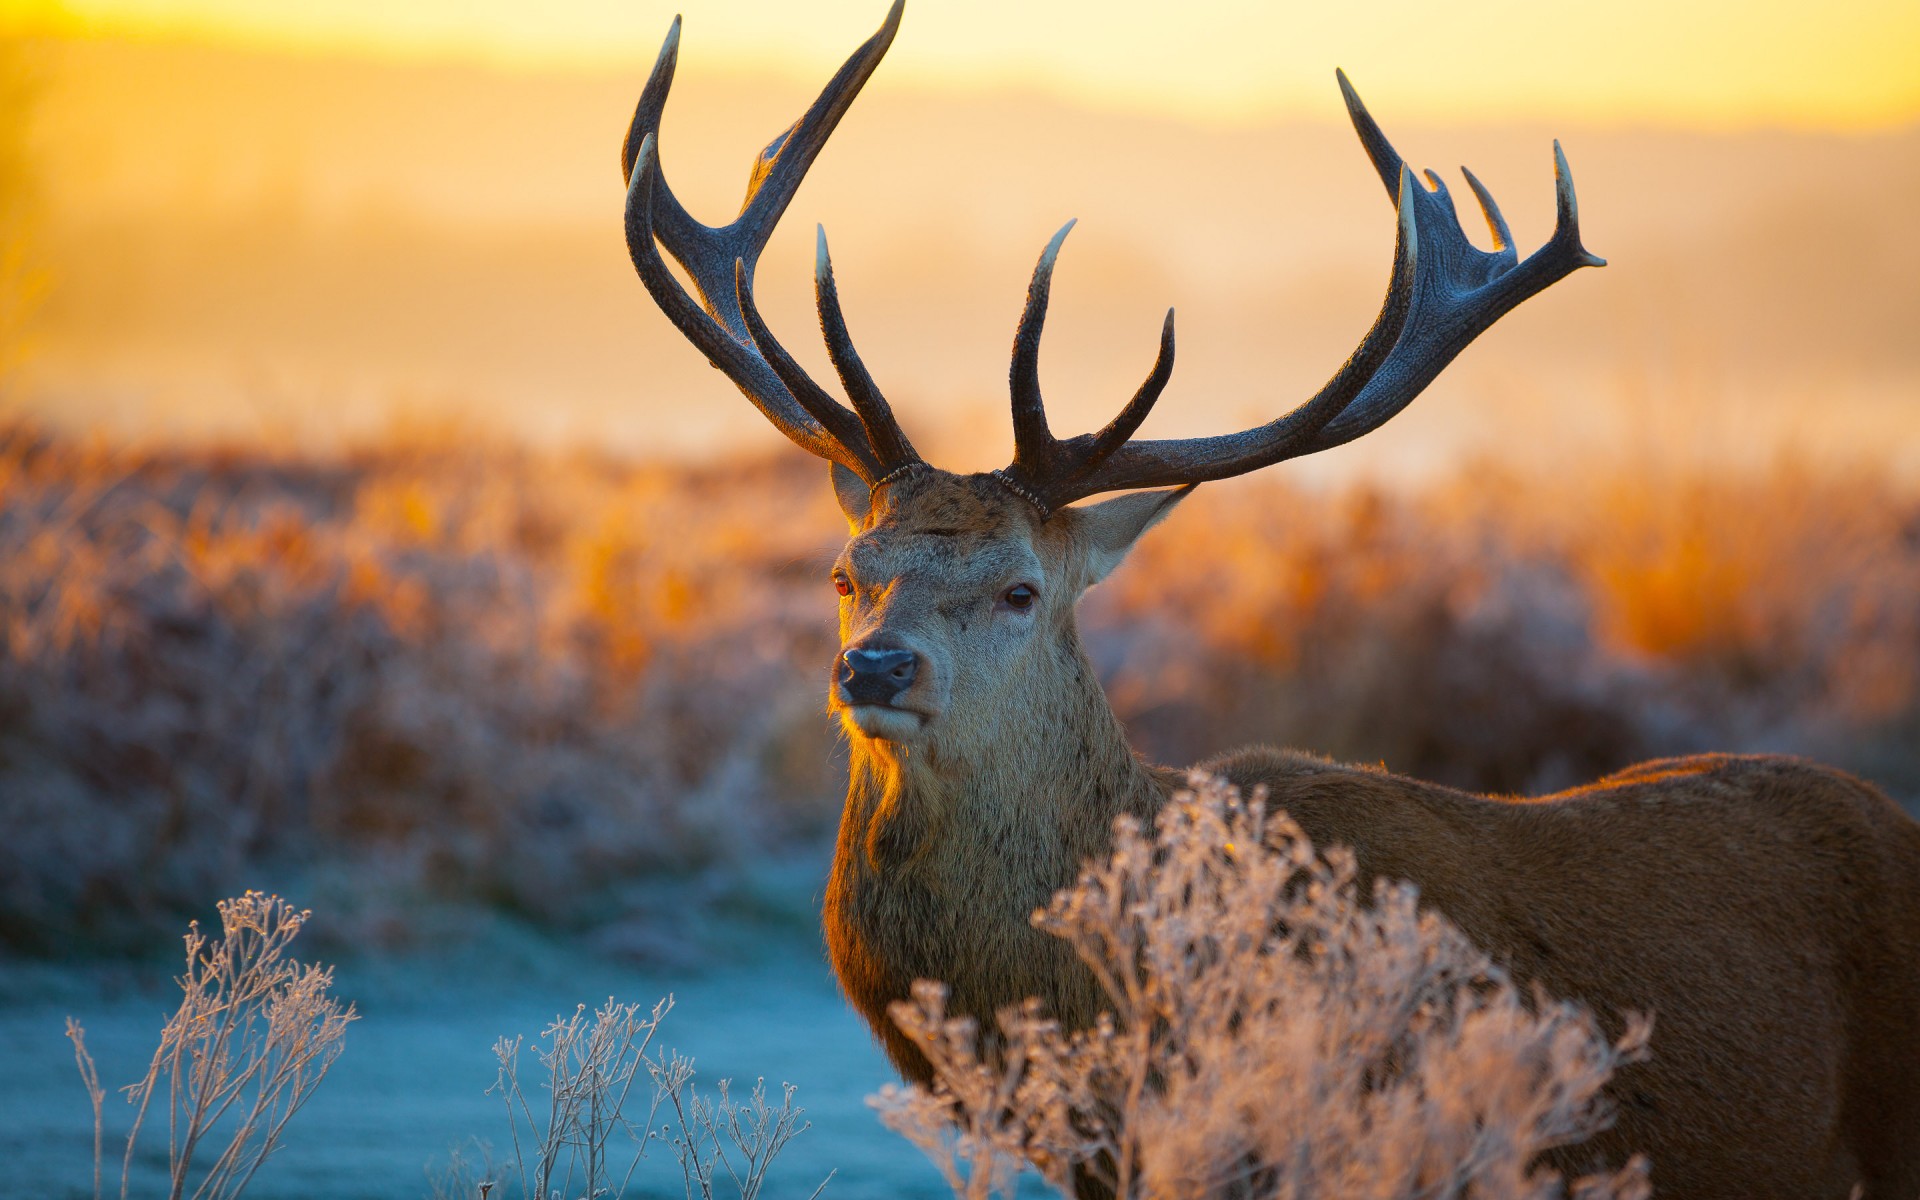 Pictures of Animals in The Wild - Male Deer with Big Antlers - HD